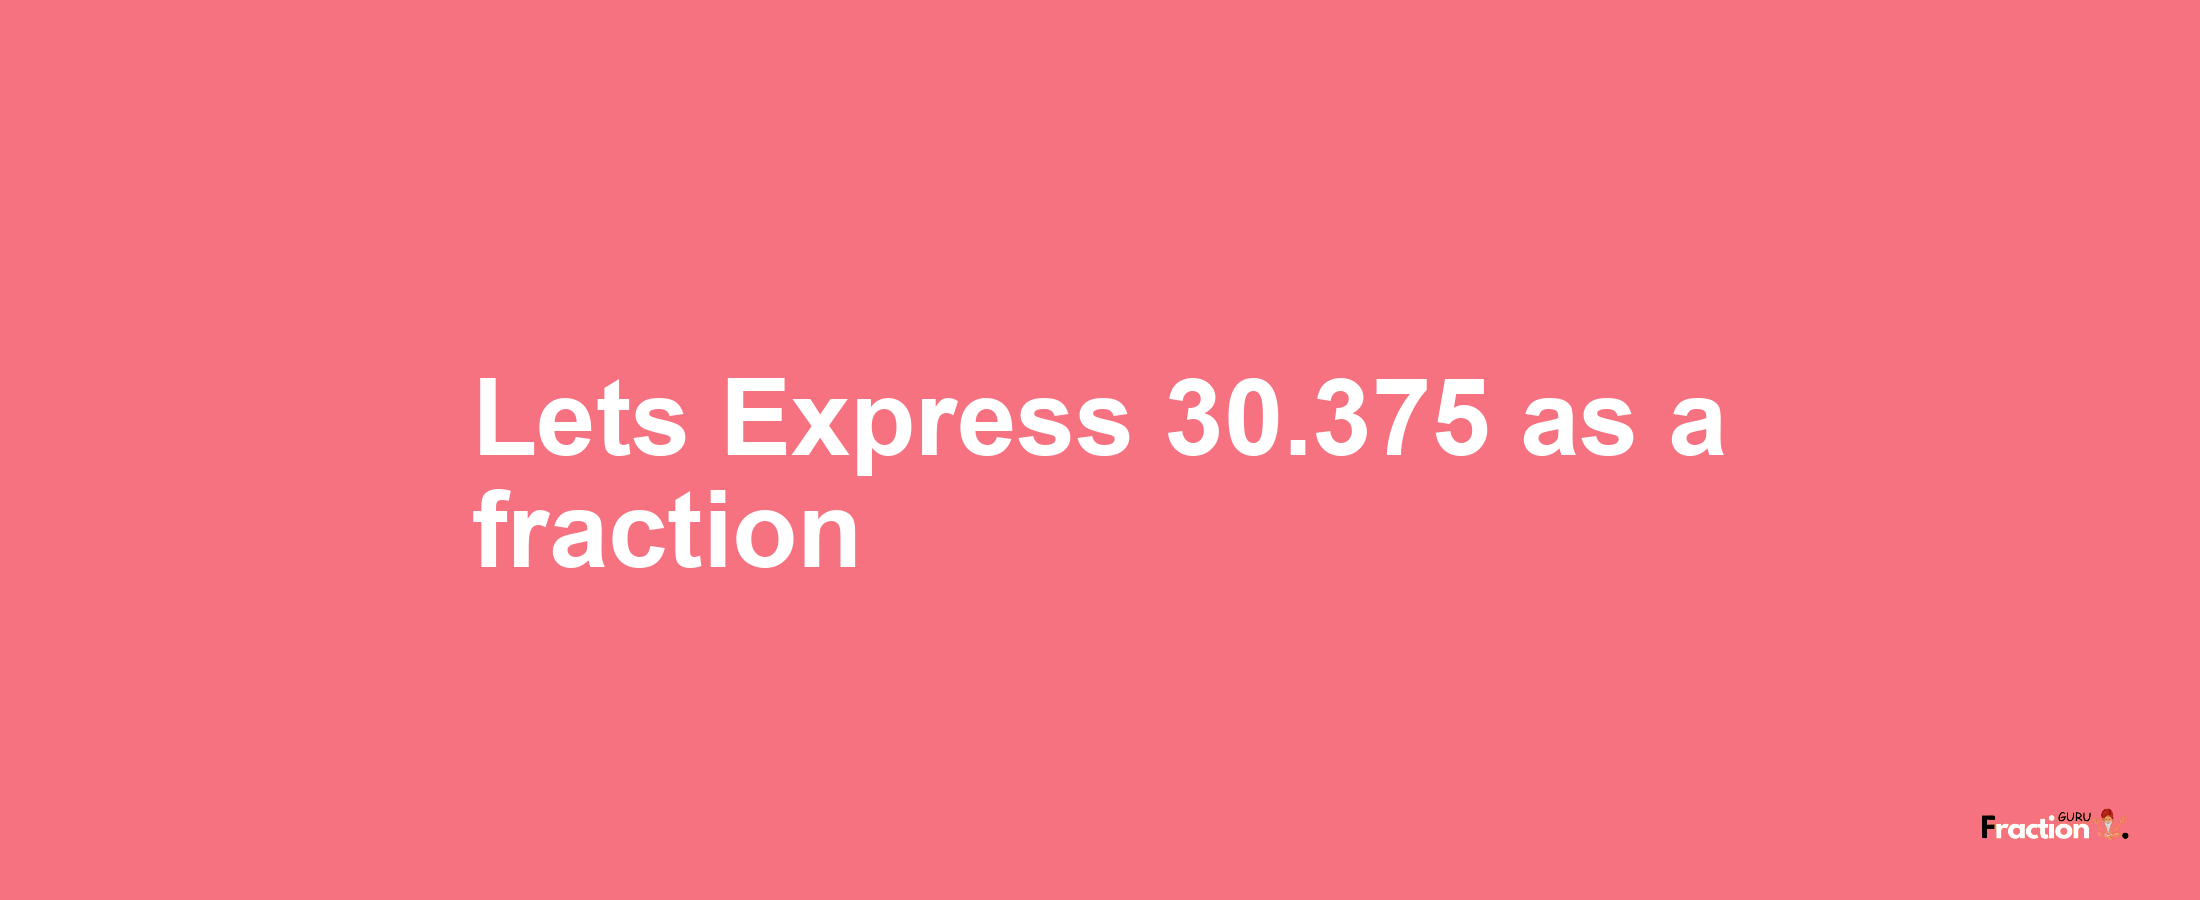 Lets Express 30.375 as afraction